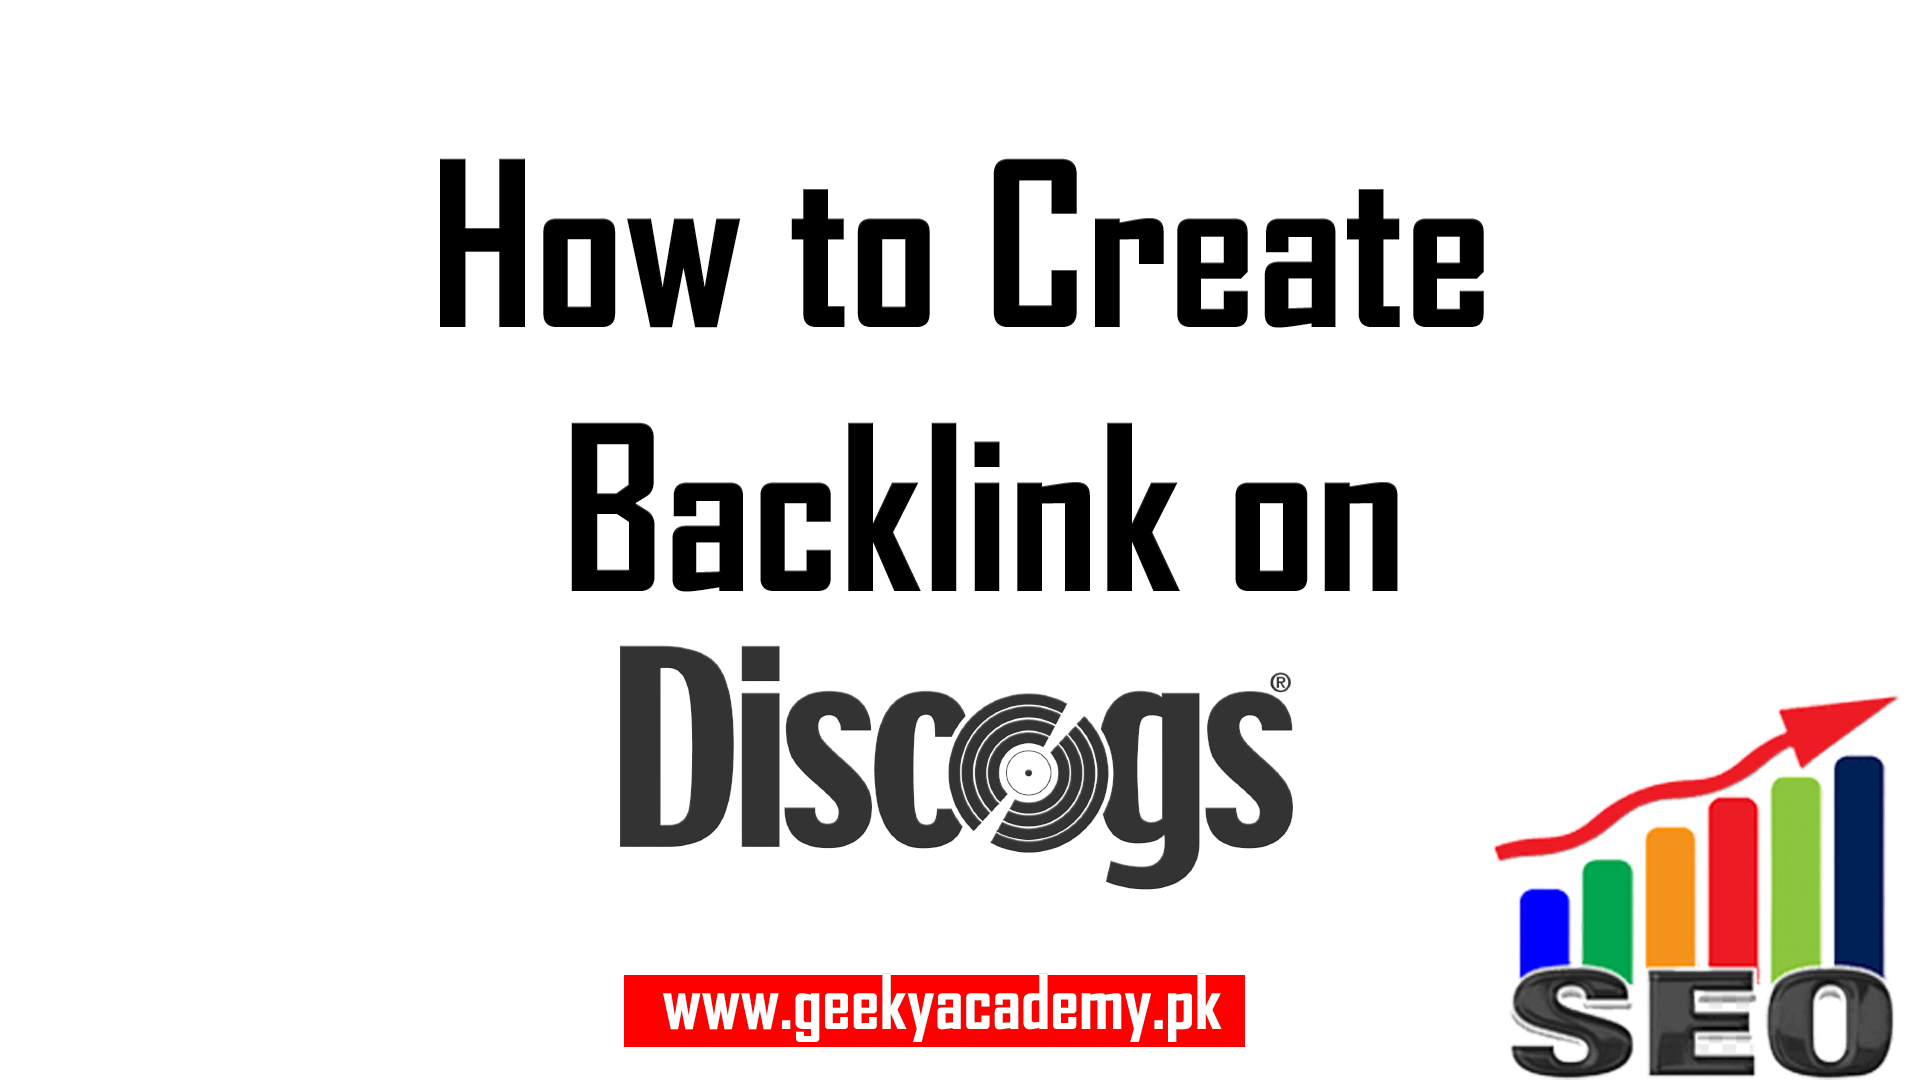 How to Create Backlink on discogs